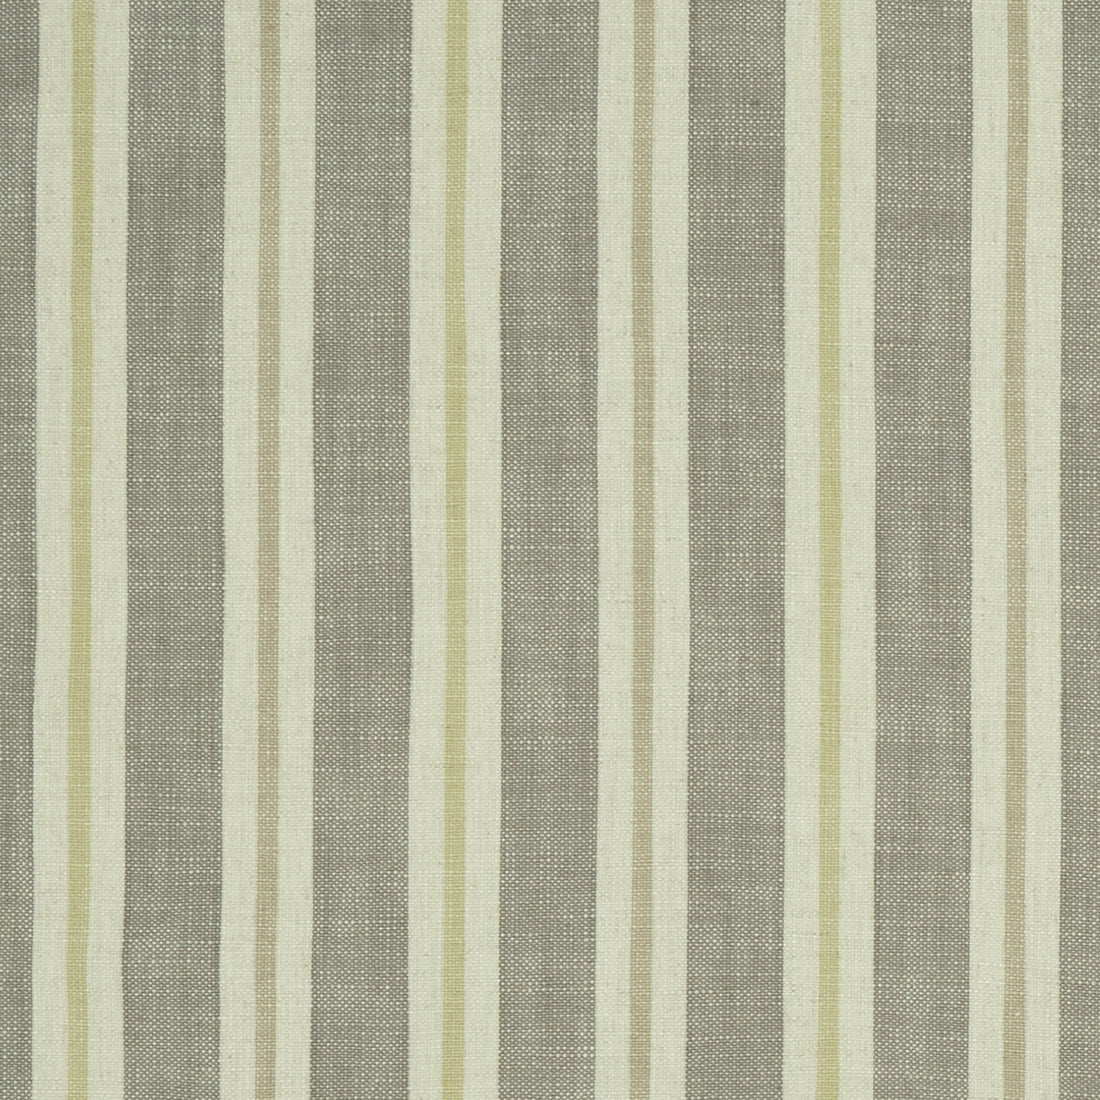 Sackville Stripe fabric in citron/natural color - pattern F1046/01.CAC.0 - by Clarke And Clarke in the Clarke &amp; Clarke Castle Garden collection